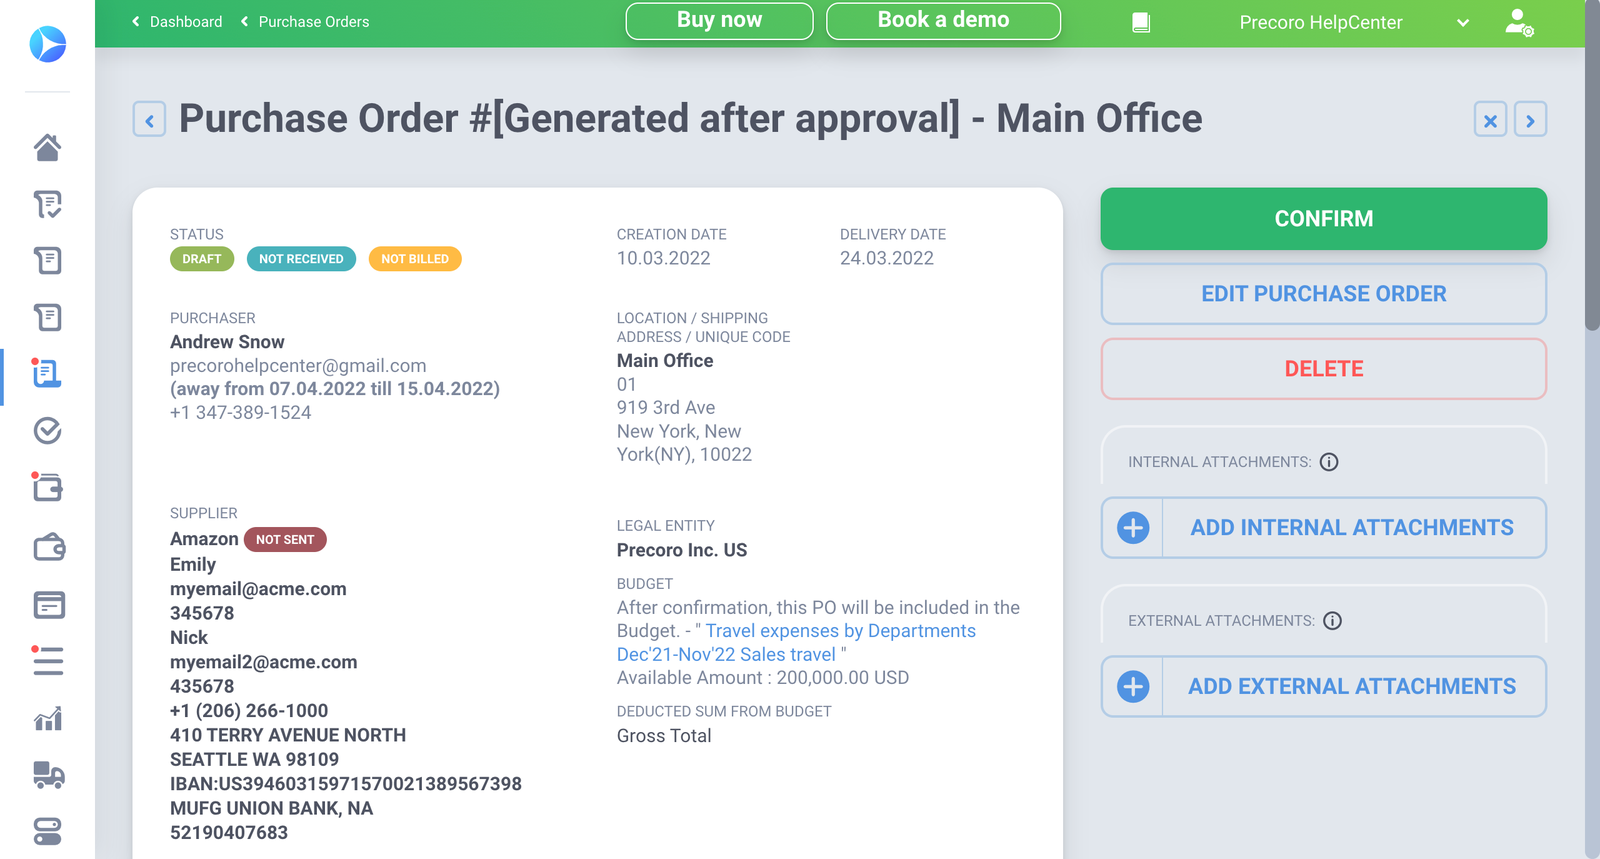 Purchase Order details with hidden number